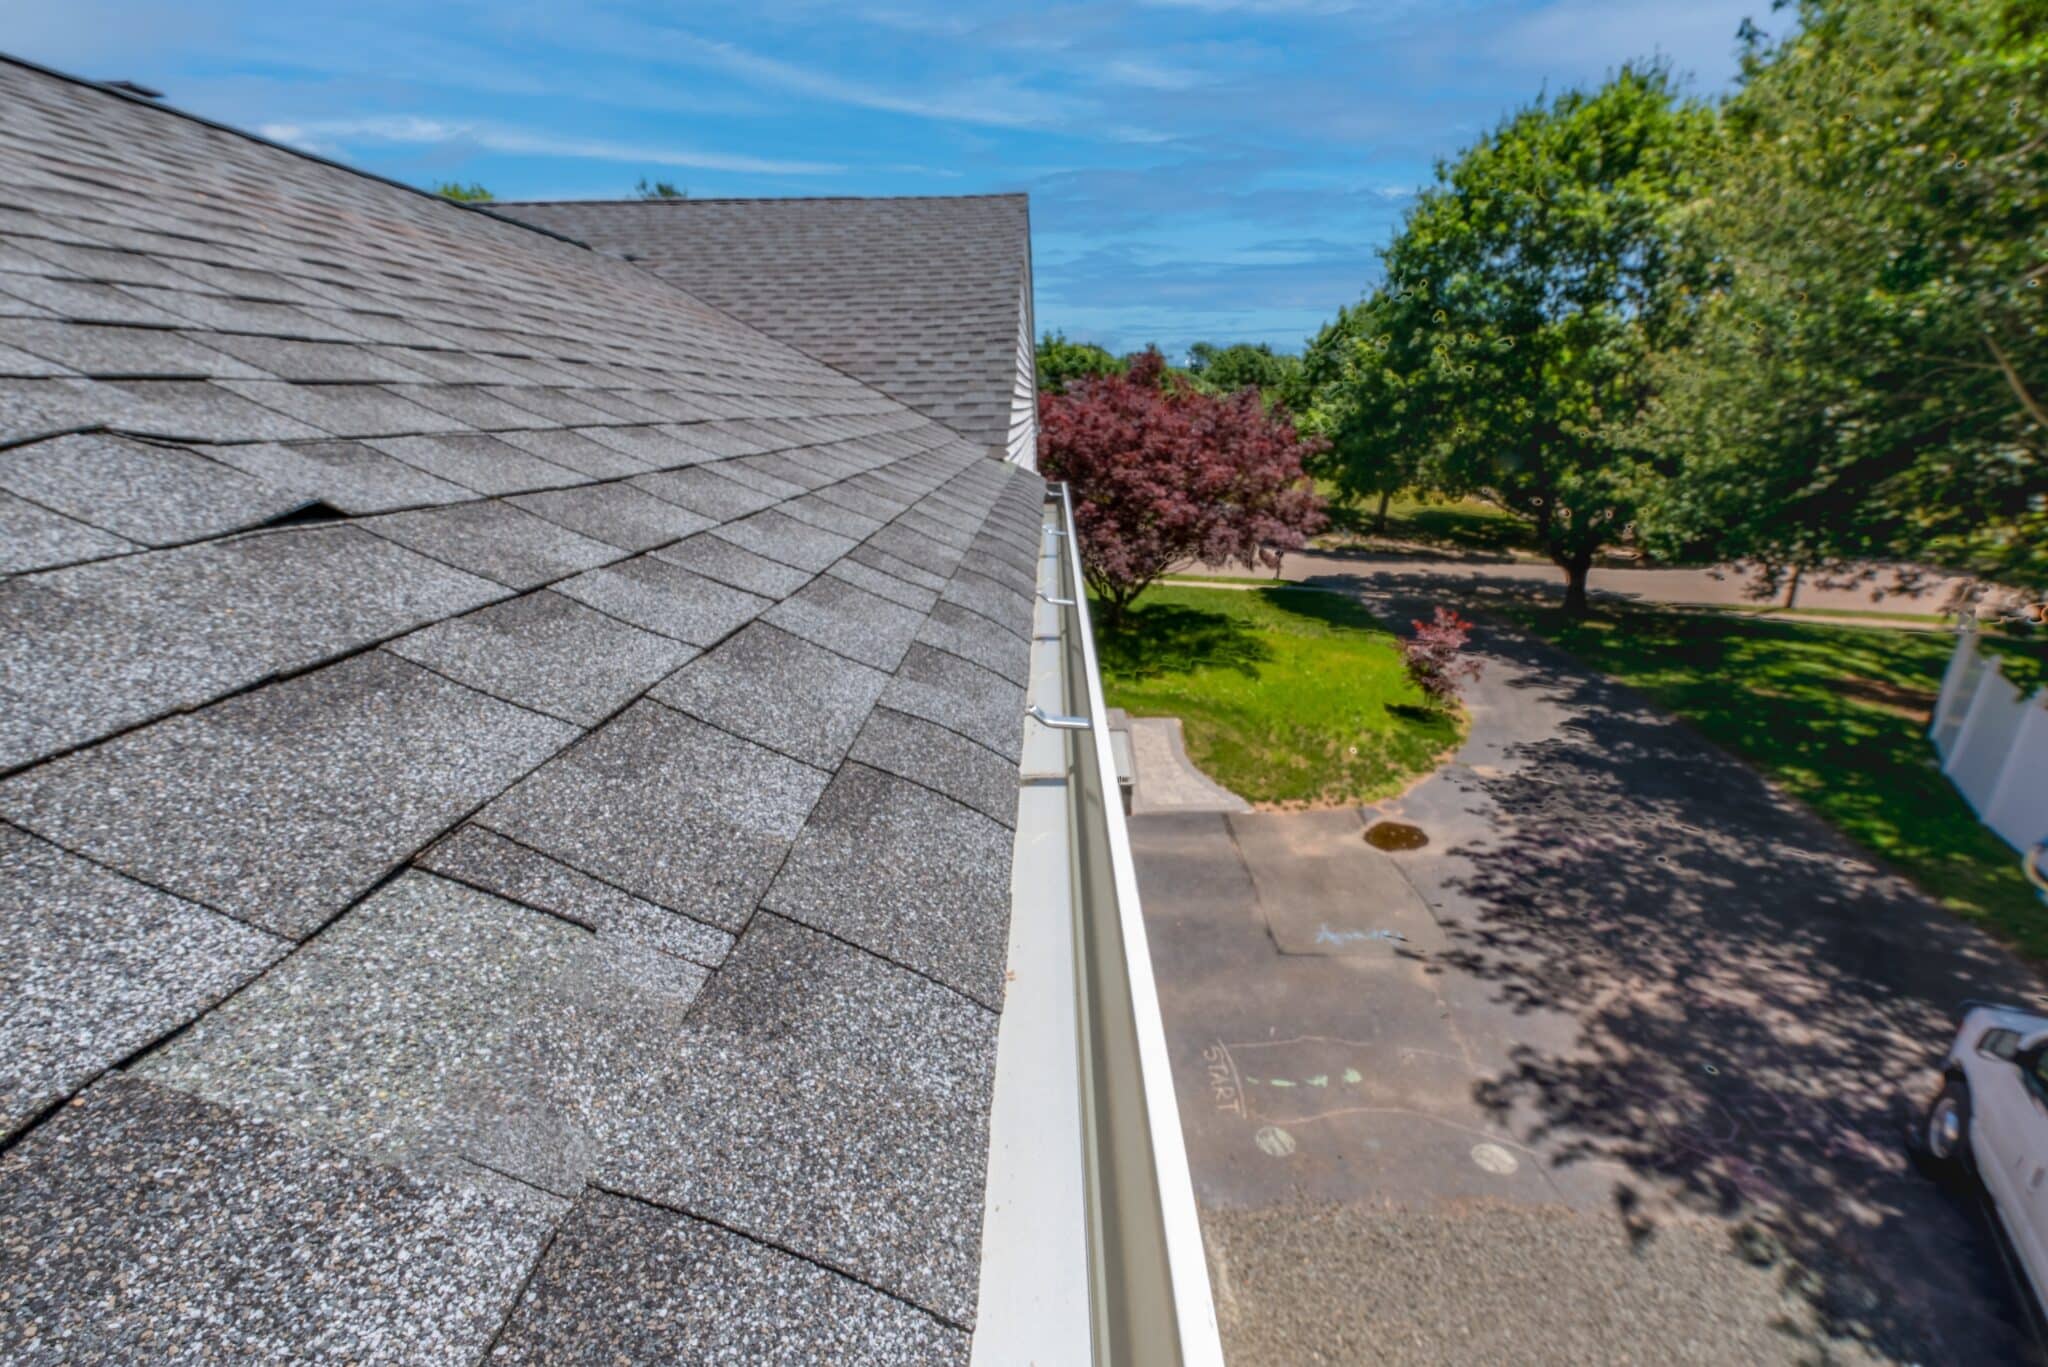 Gutter Cleaning Service Hanson, MA